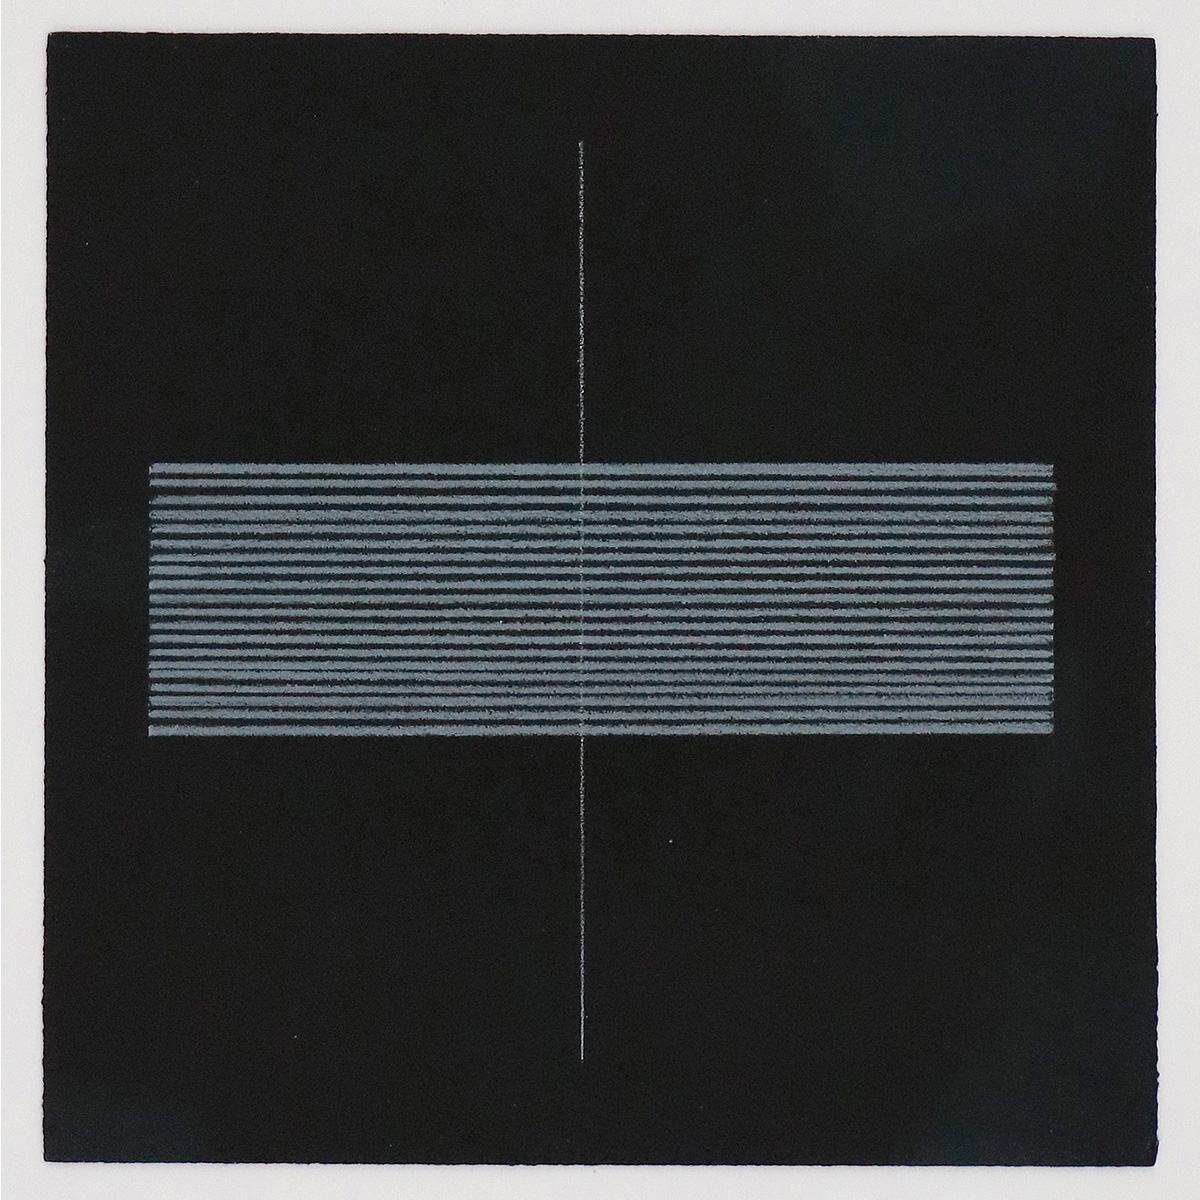 Black ground 3, 200216,5 x 16,5 cm in 25,2 x 24,7 cmColoured pencil on paper; framed 